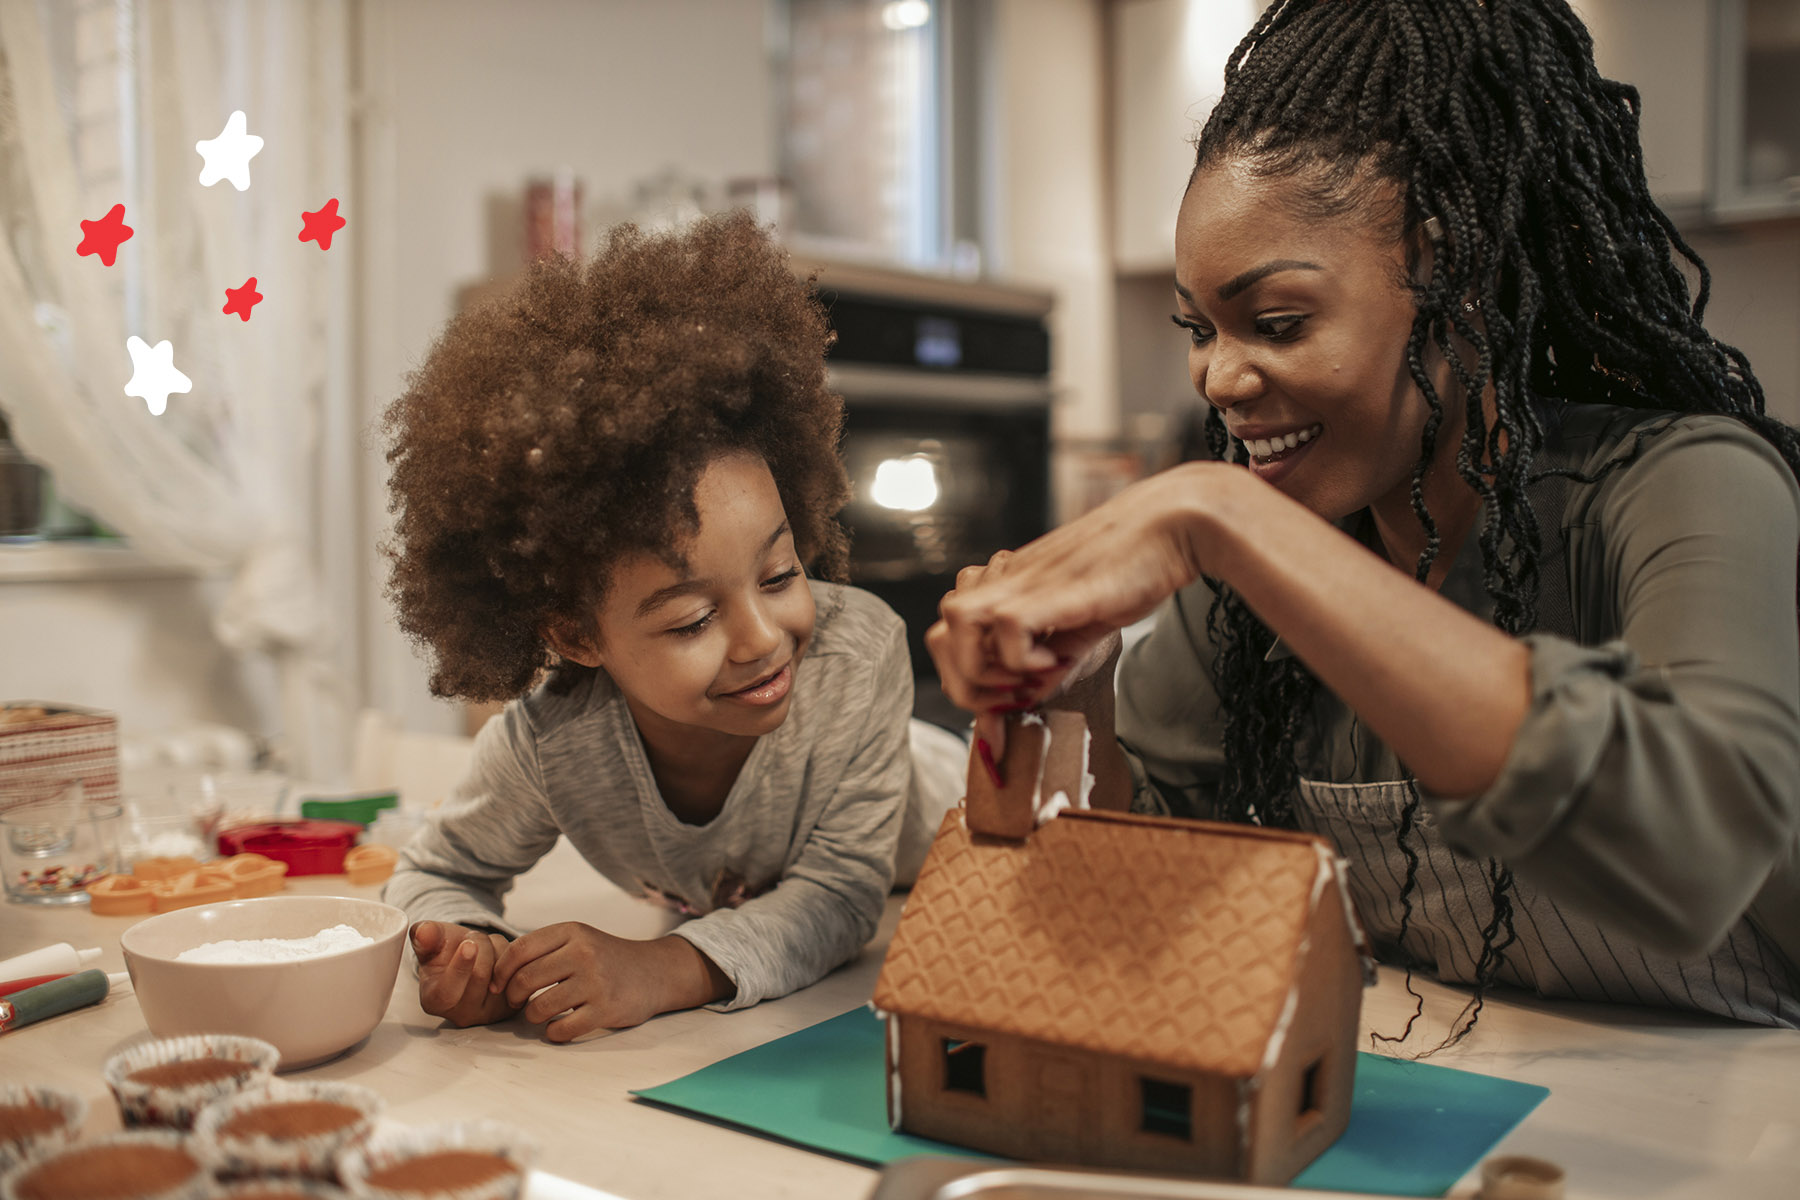 A photo of a little girl and her mum making a gingerbread house together for Christmas